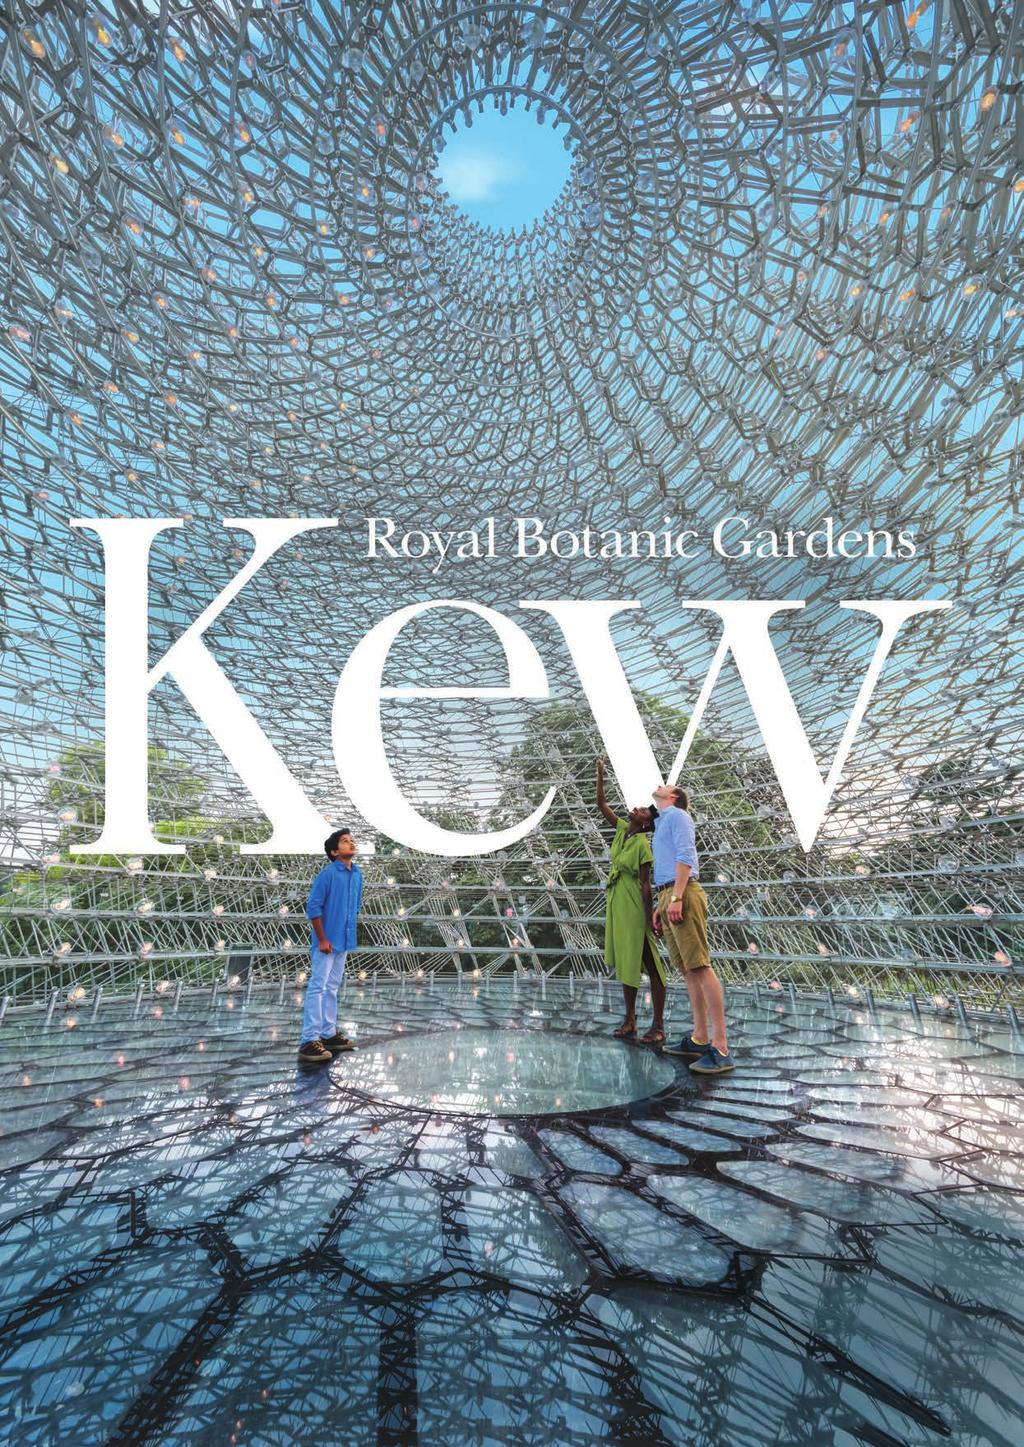 Head of Visitor Programmes and Exhibitions, Kew Gardens